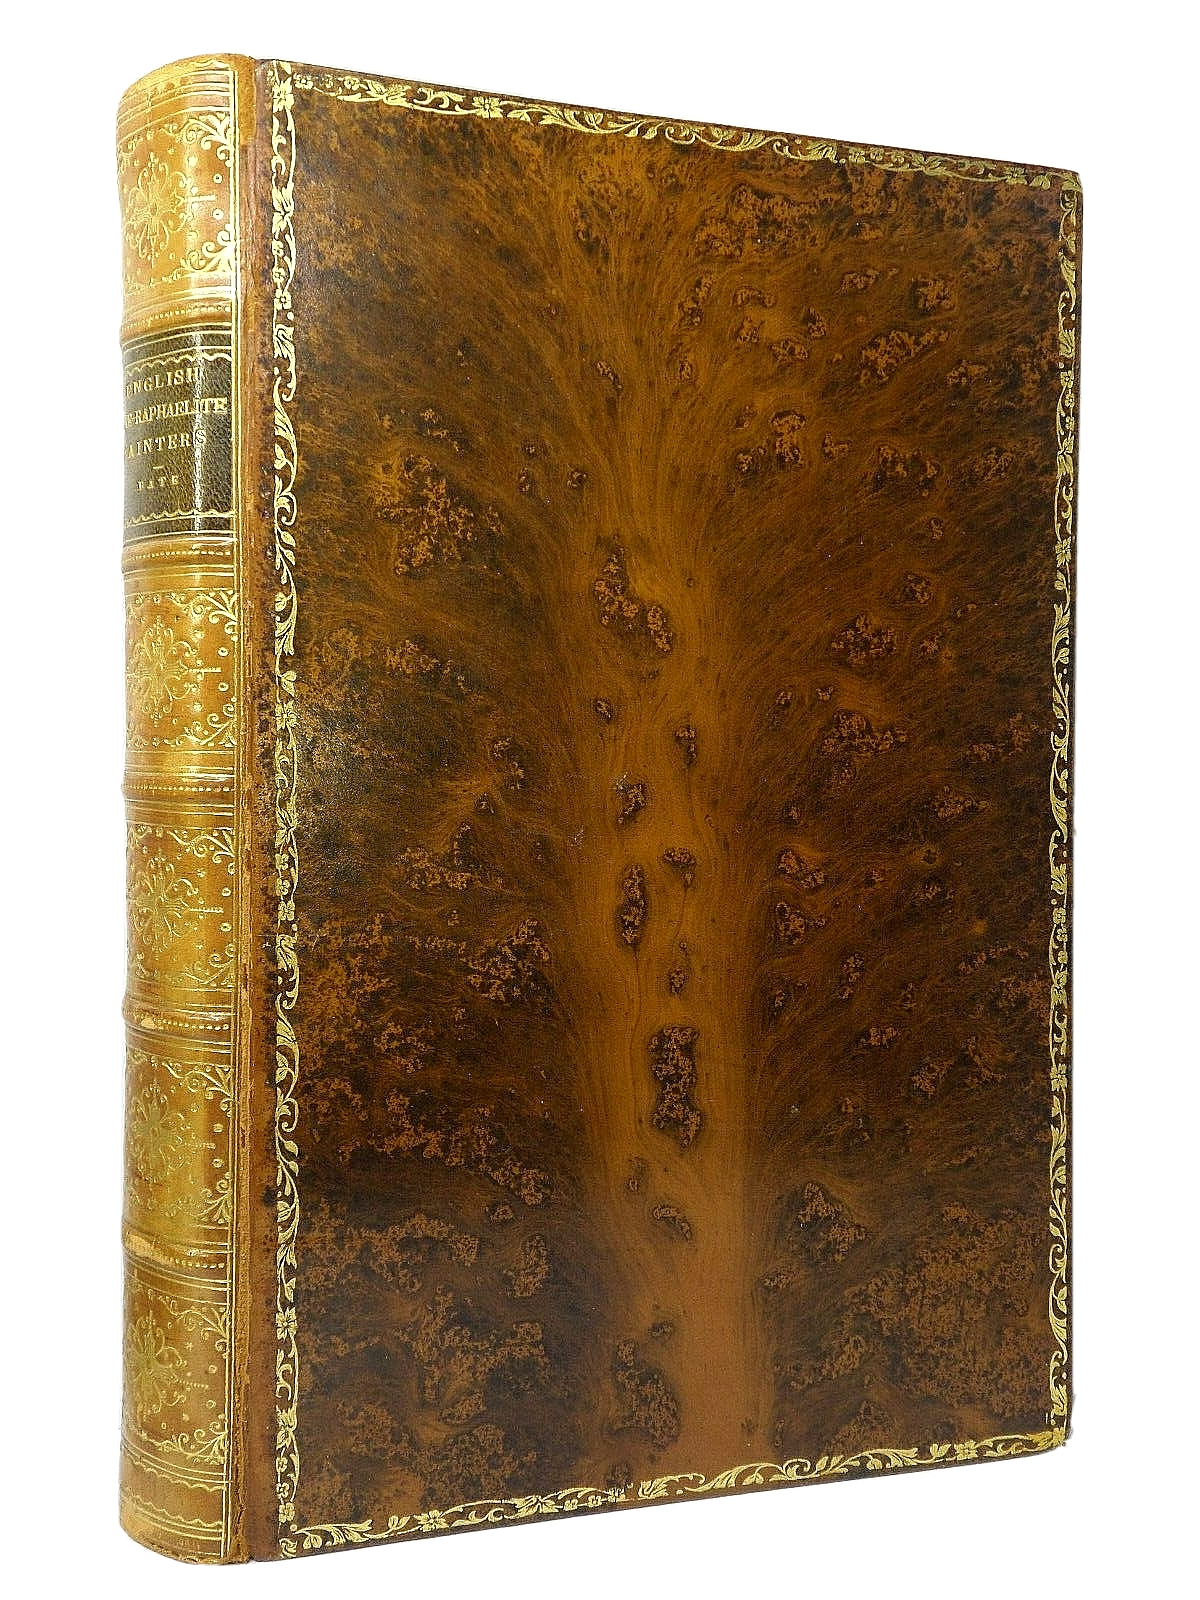 THE ENGLISH PRE-RAPHAELITE PAINTERS BY PERCY BATE 1901 FINE RIVIERE BINDING